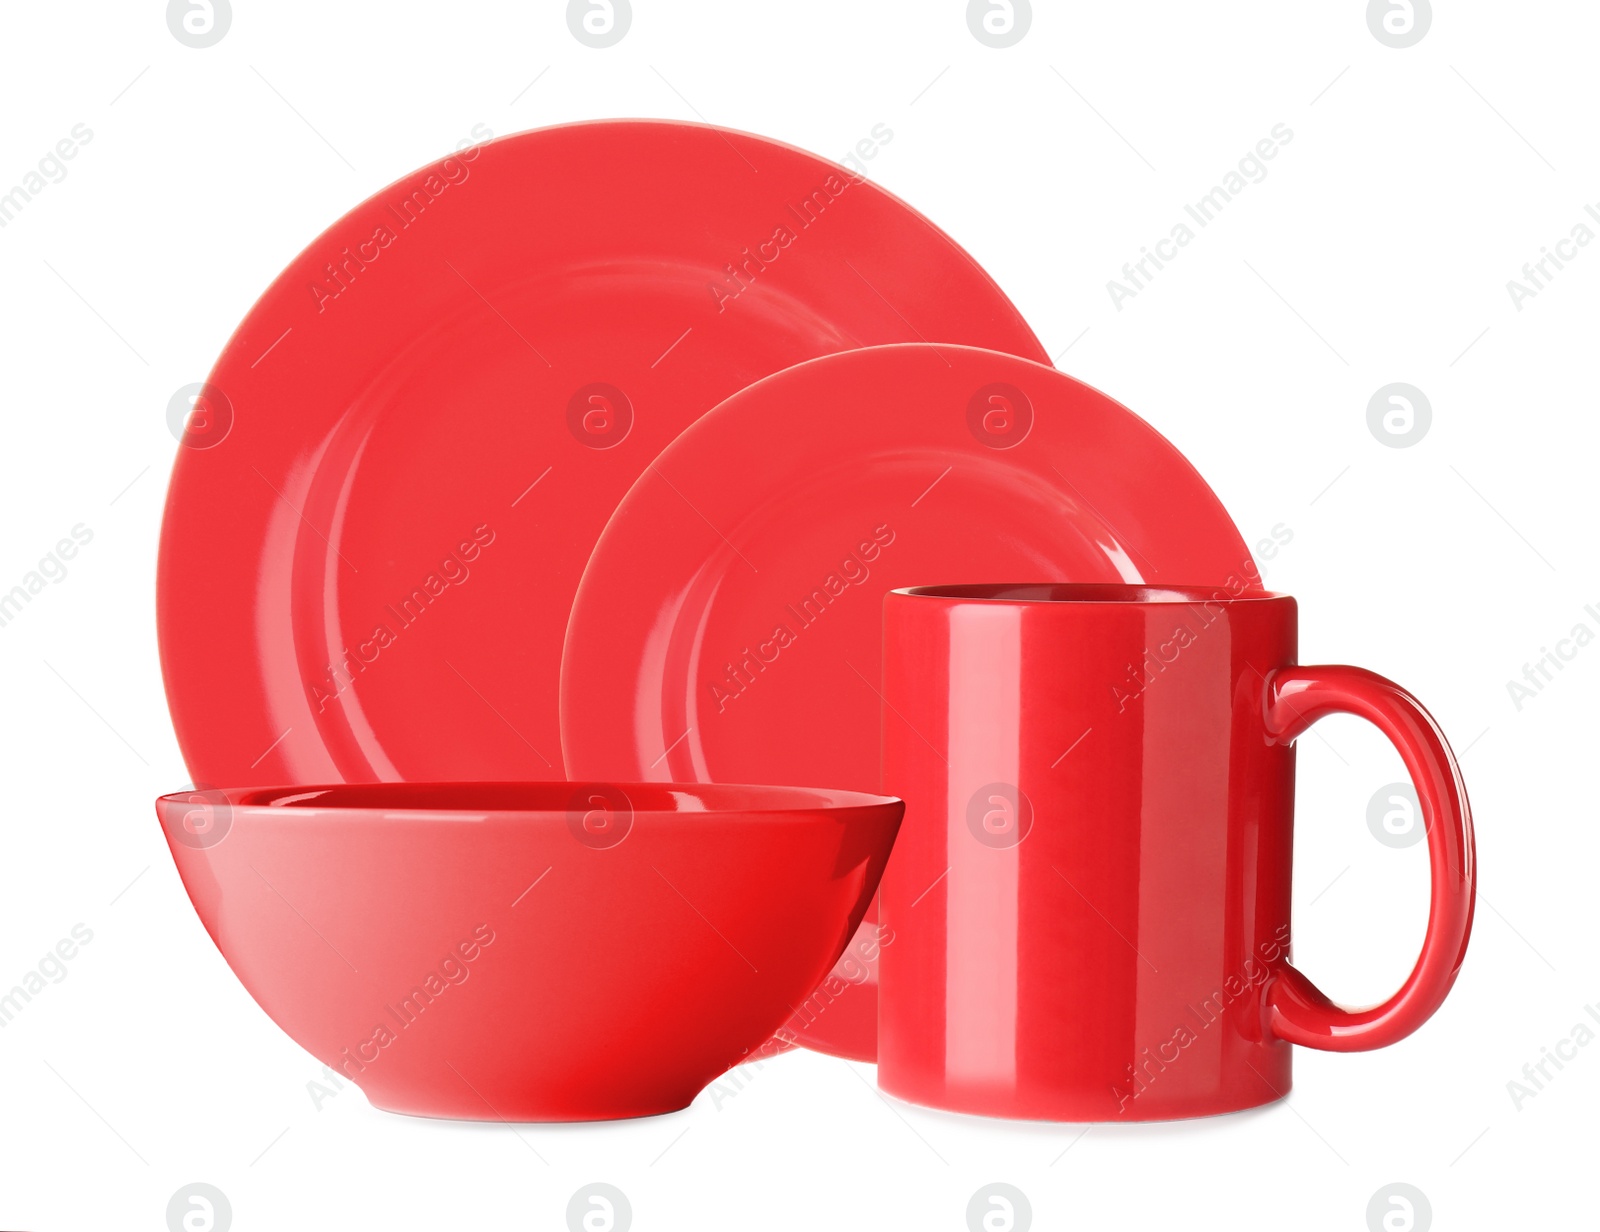 Image of Set of beautiful red dinnerware on white background